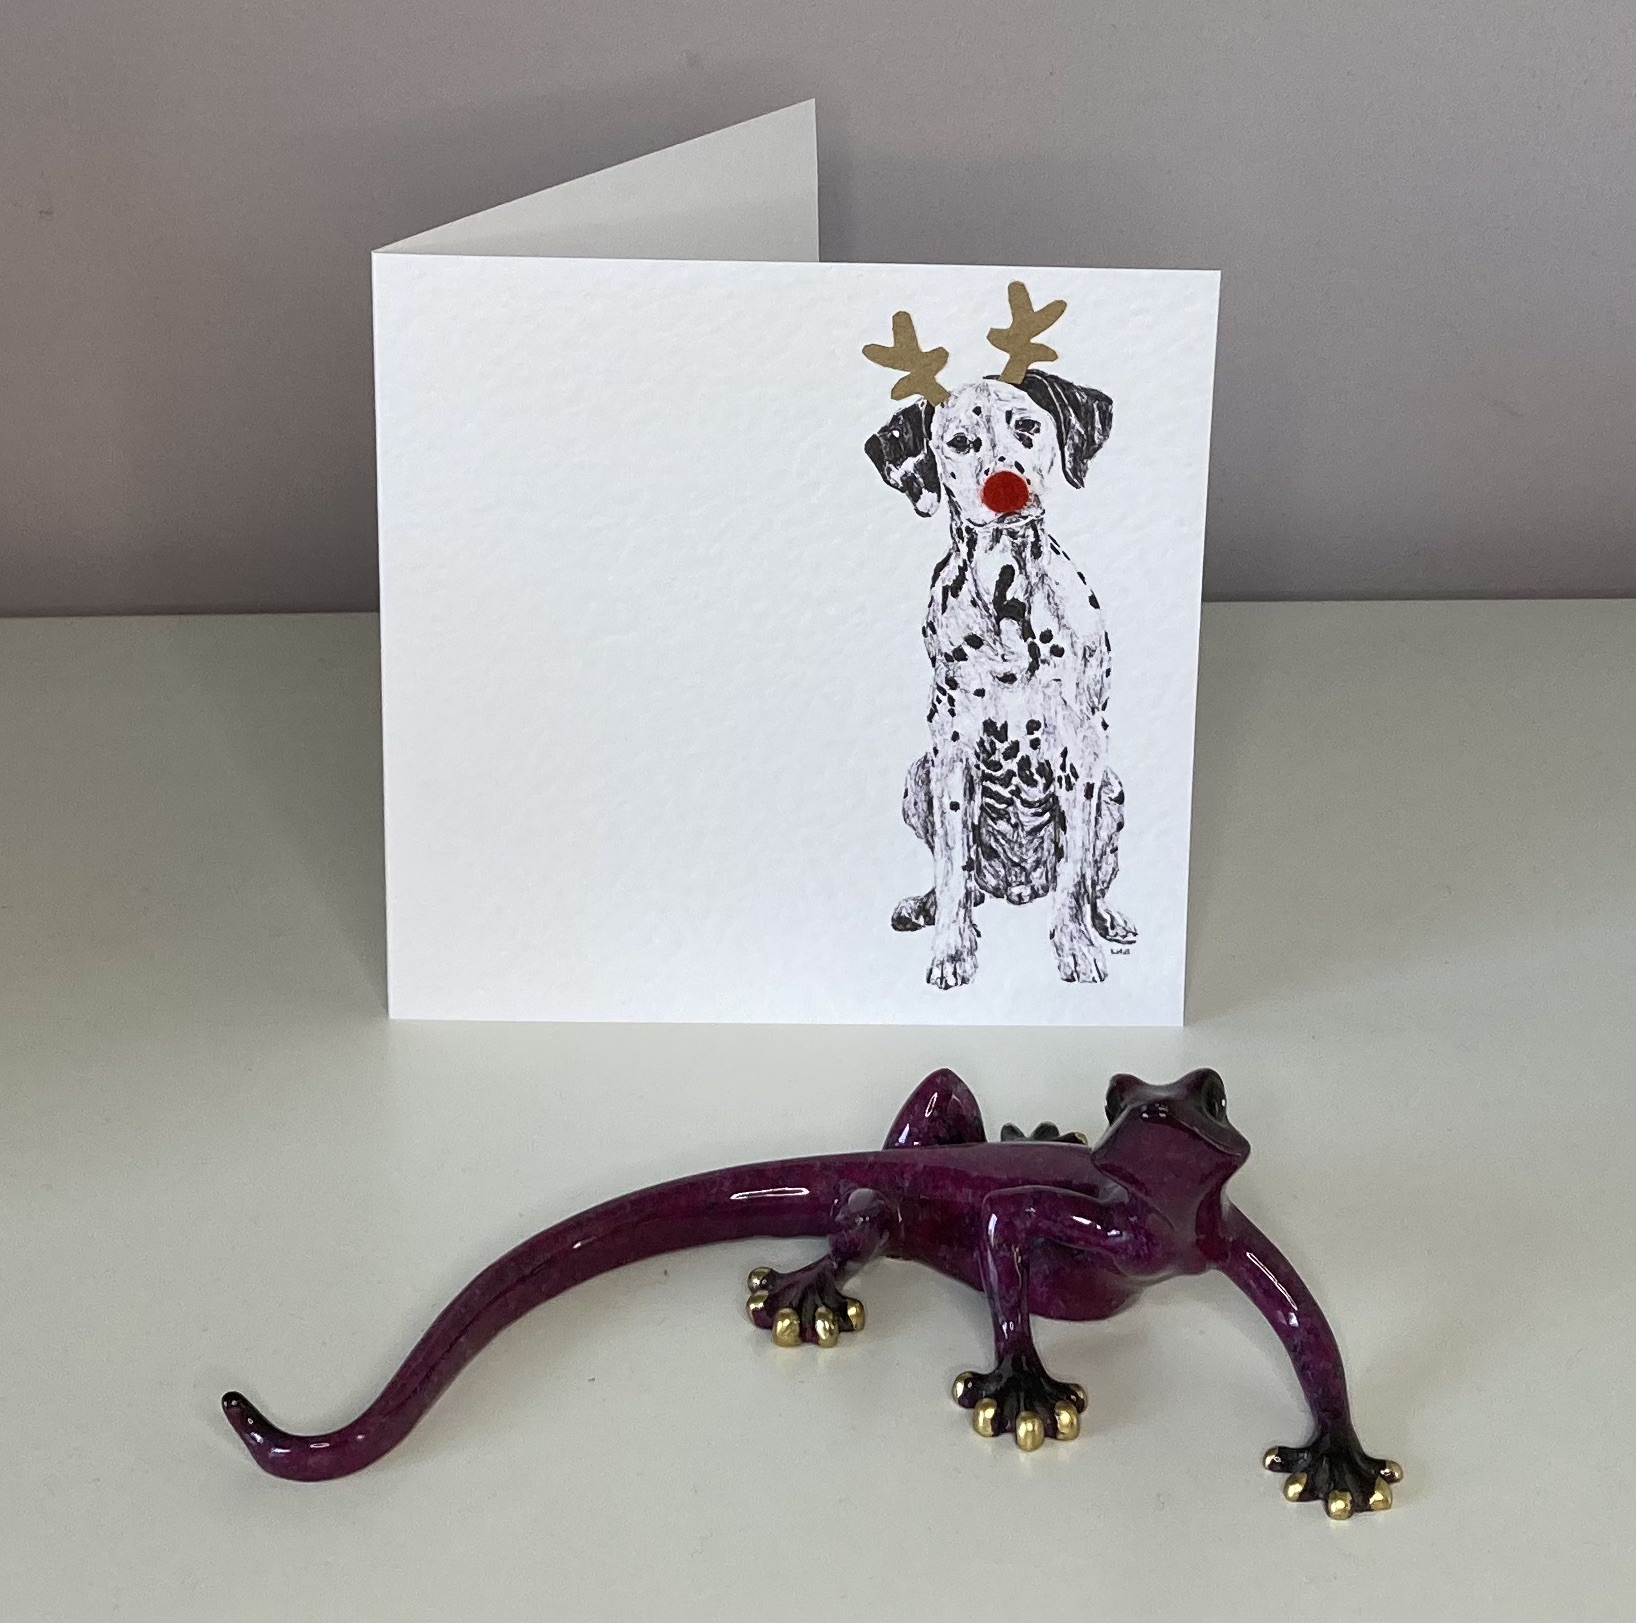 Dalmatian with reindeer antlers and red nose Christmas card by Louisa Hill